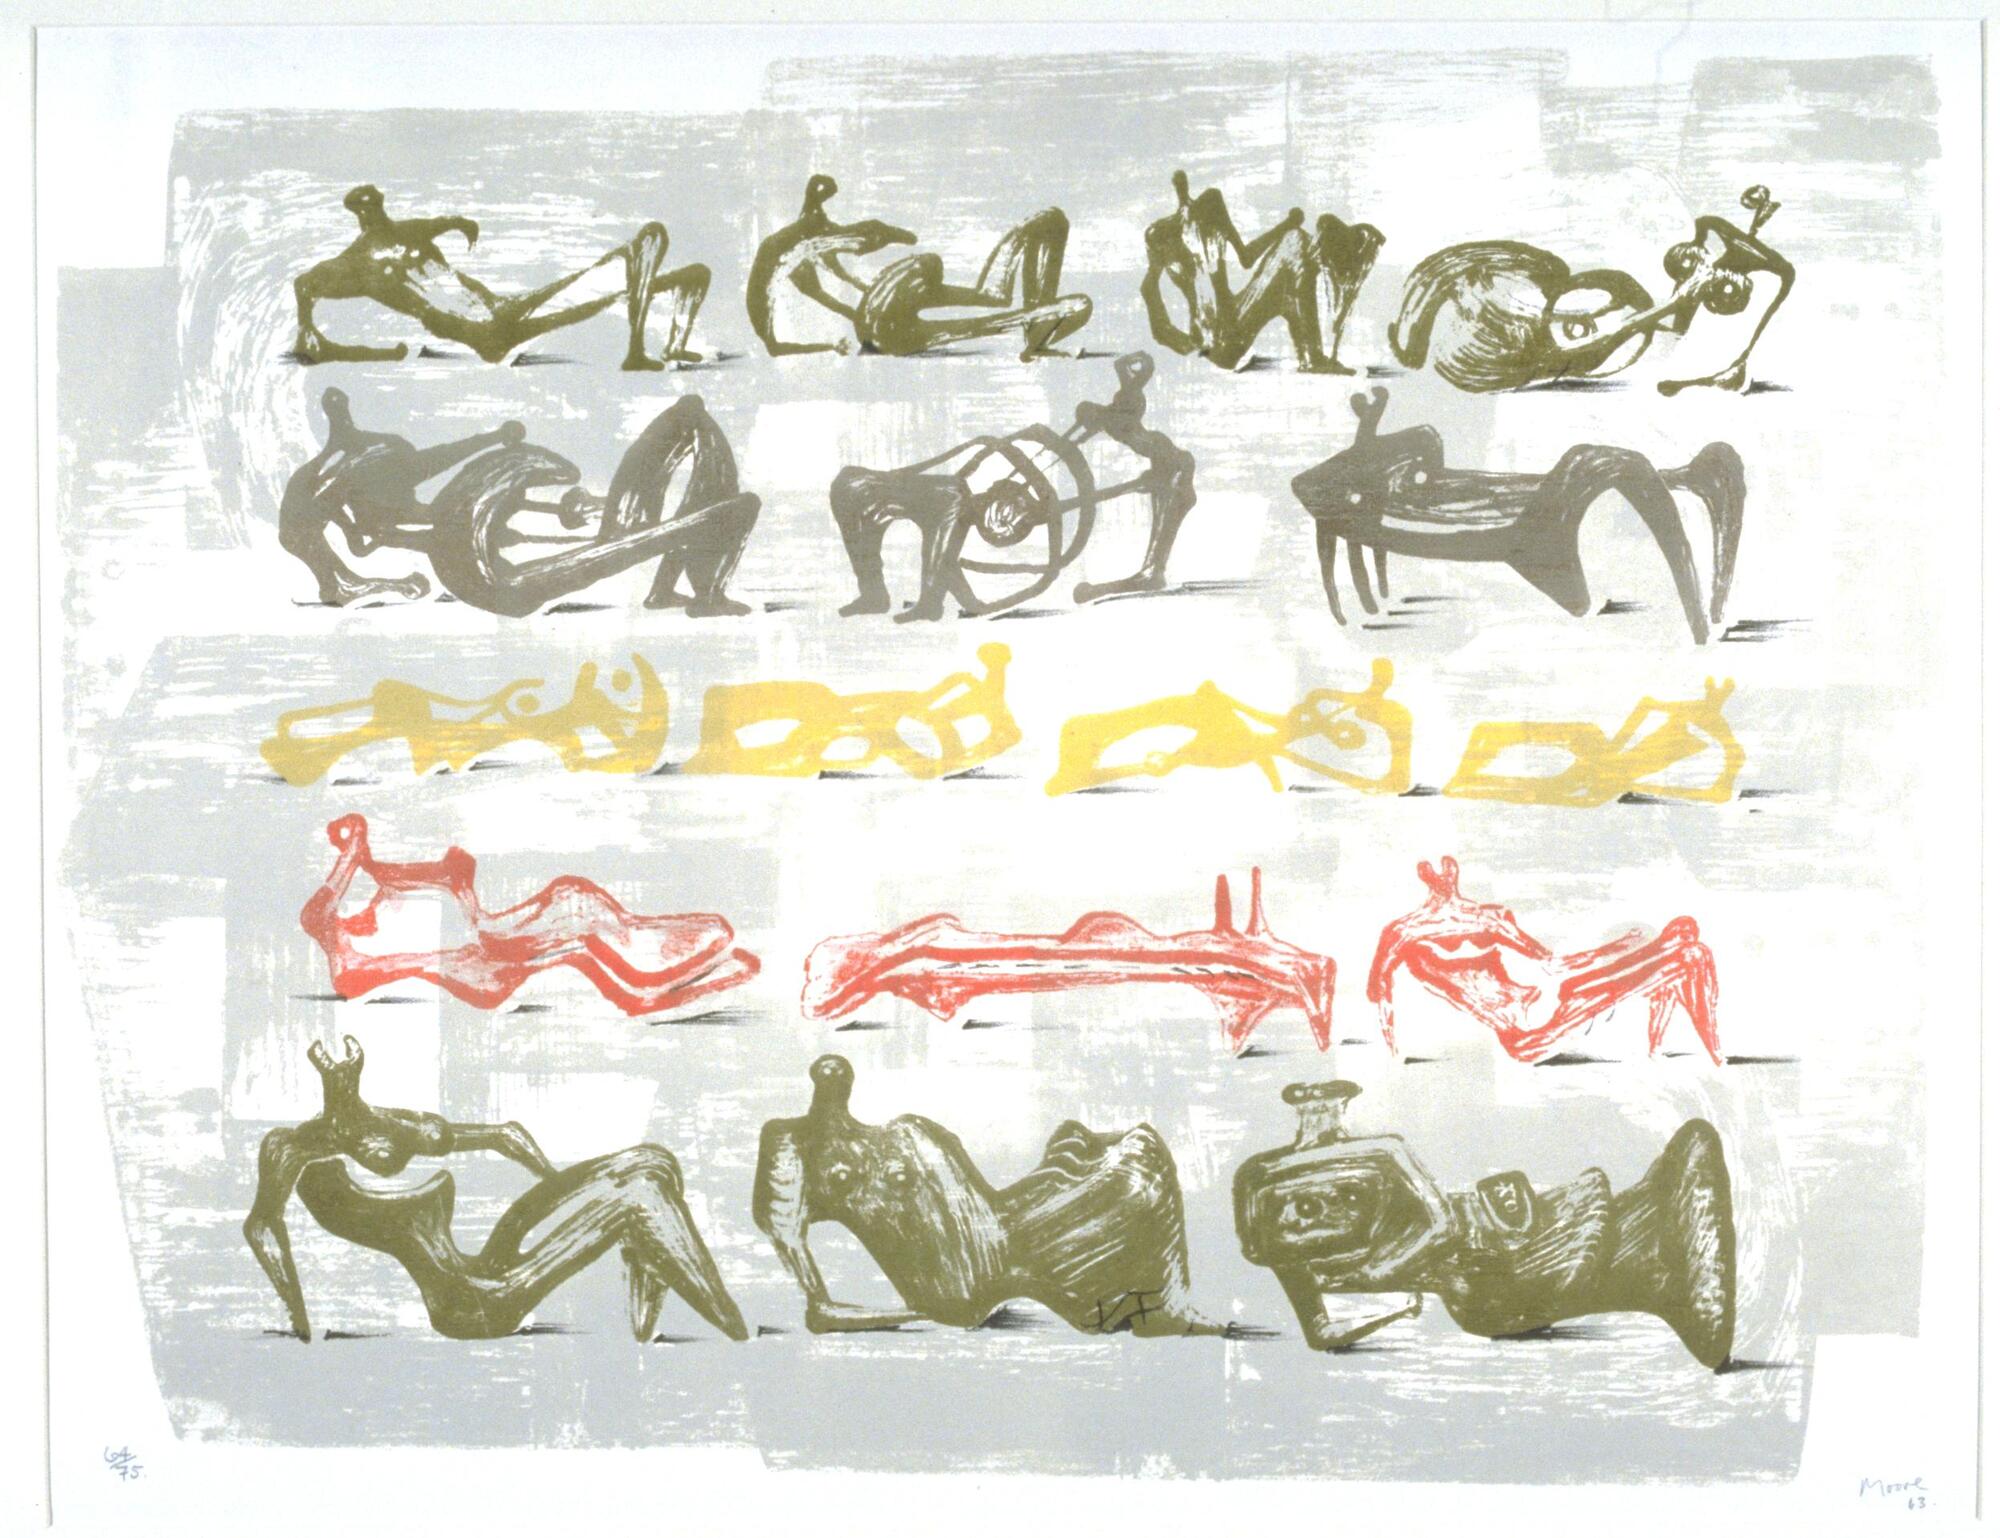 Seventeen reclining abstract figures in five rows. Each row's figures are in a different color: top to bottom: green, grey, yellow, orange-red, green. Grey broad brushstrokes loosely cover the background. Print is numbered 64 out of 75.